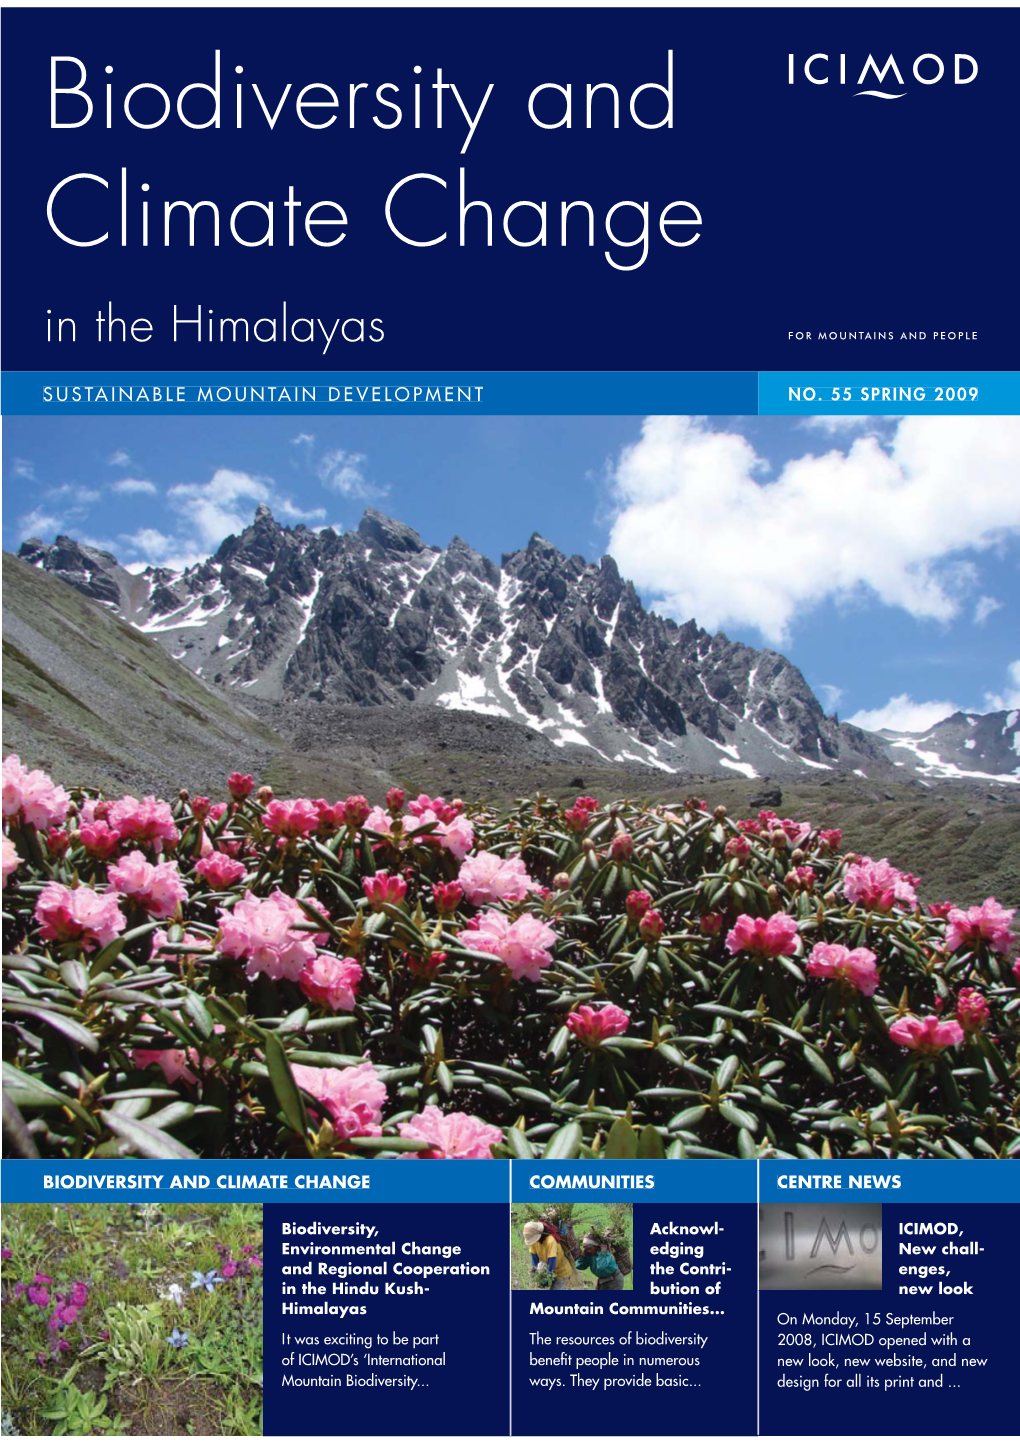 Biodiversity and Climate Change in the Himalayas